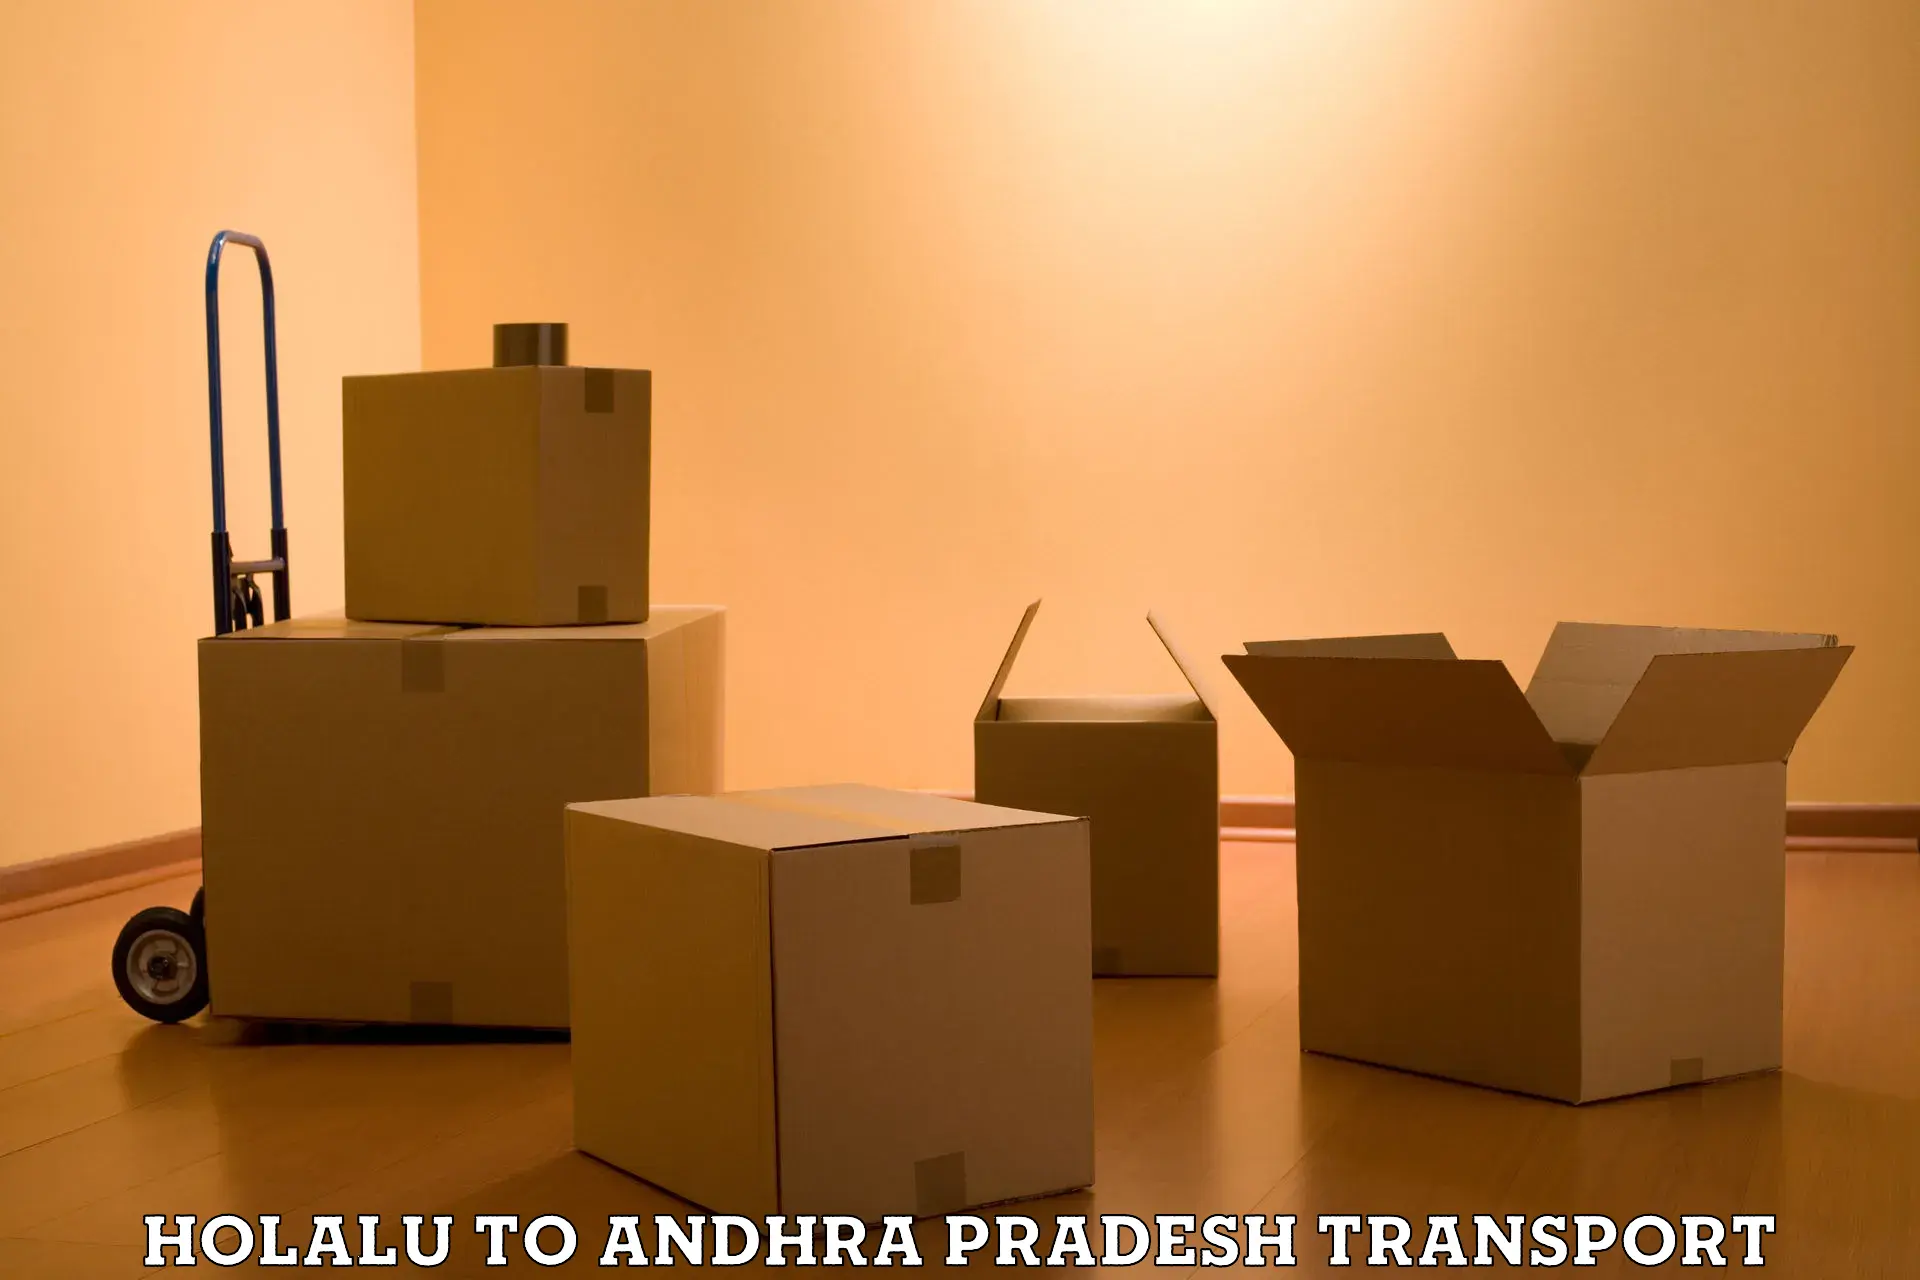 Truck transport companies in India Holalu to Vempalli